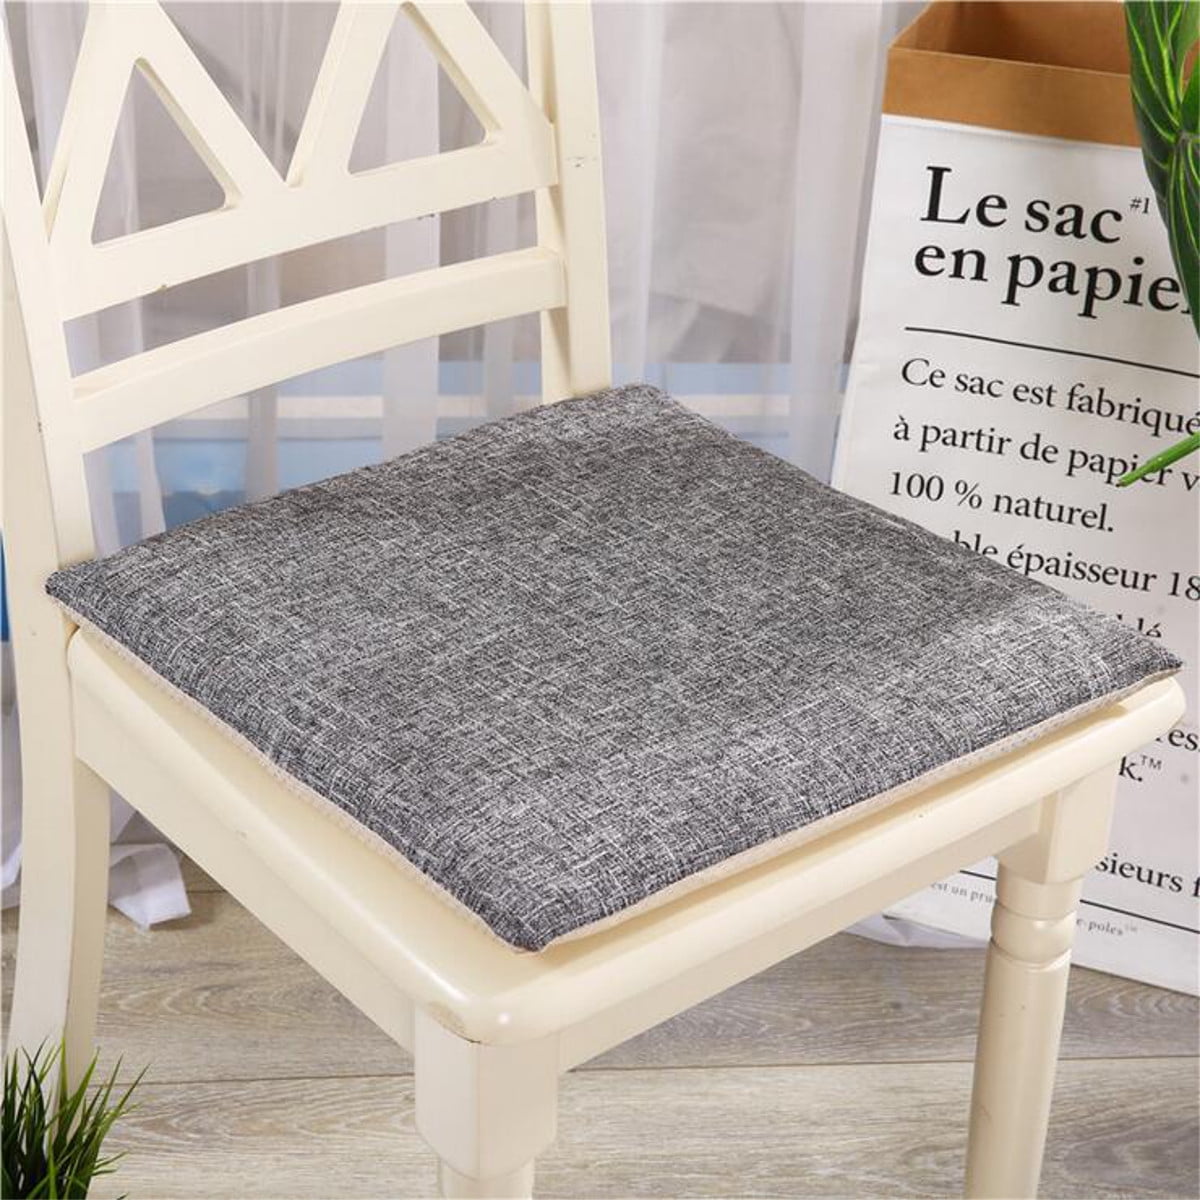 Non Slip Cotton Dining Chair Pads Multi Colors Washable All Seasons 15 Inches Square Grid Chair Seat Cushions Indoor Outdoor Sofa Floor Home Kitchen Office Decor Walmartcom Walmartcom